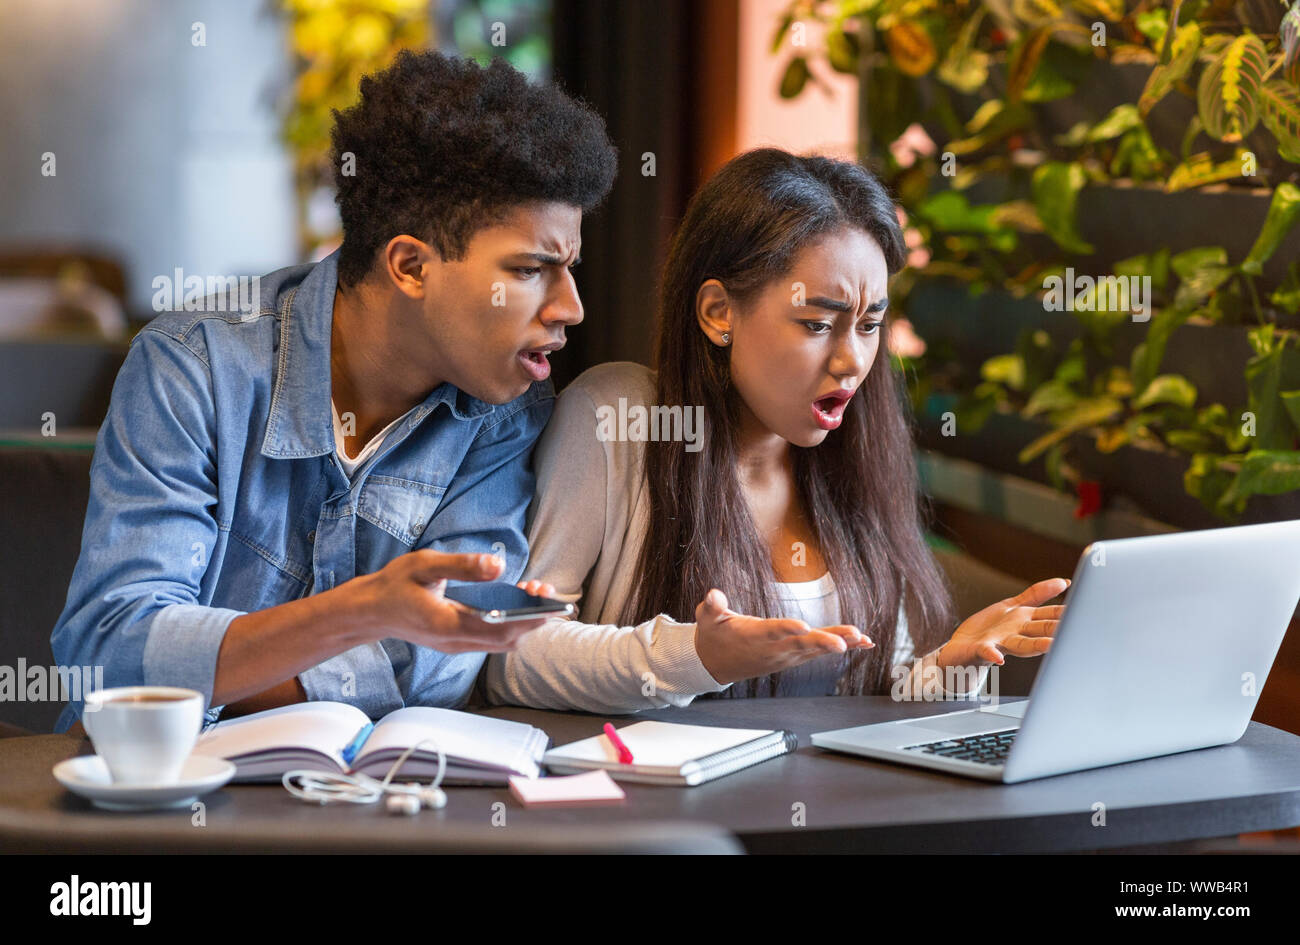 Desperate students looking at laptop with furious faces Stock Photo